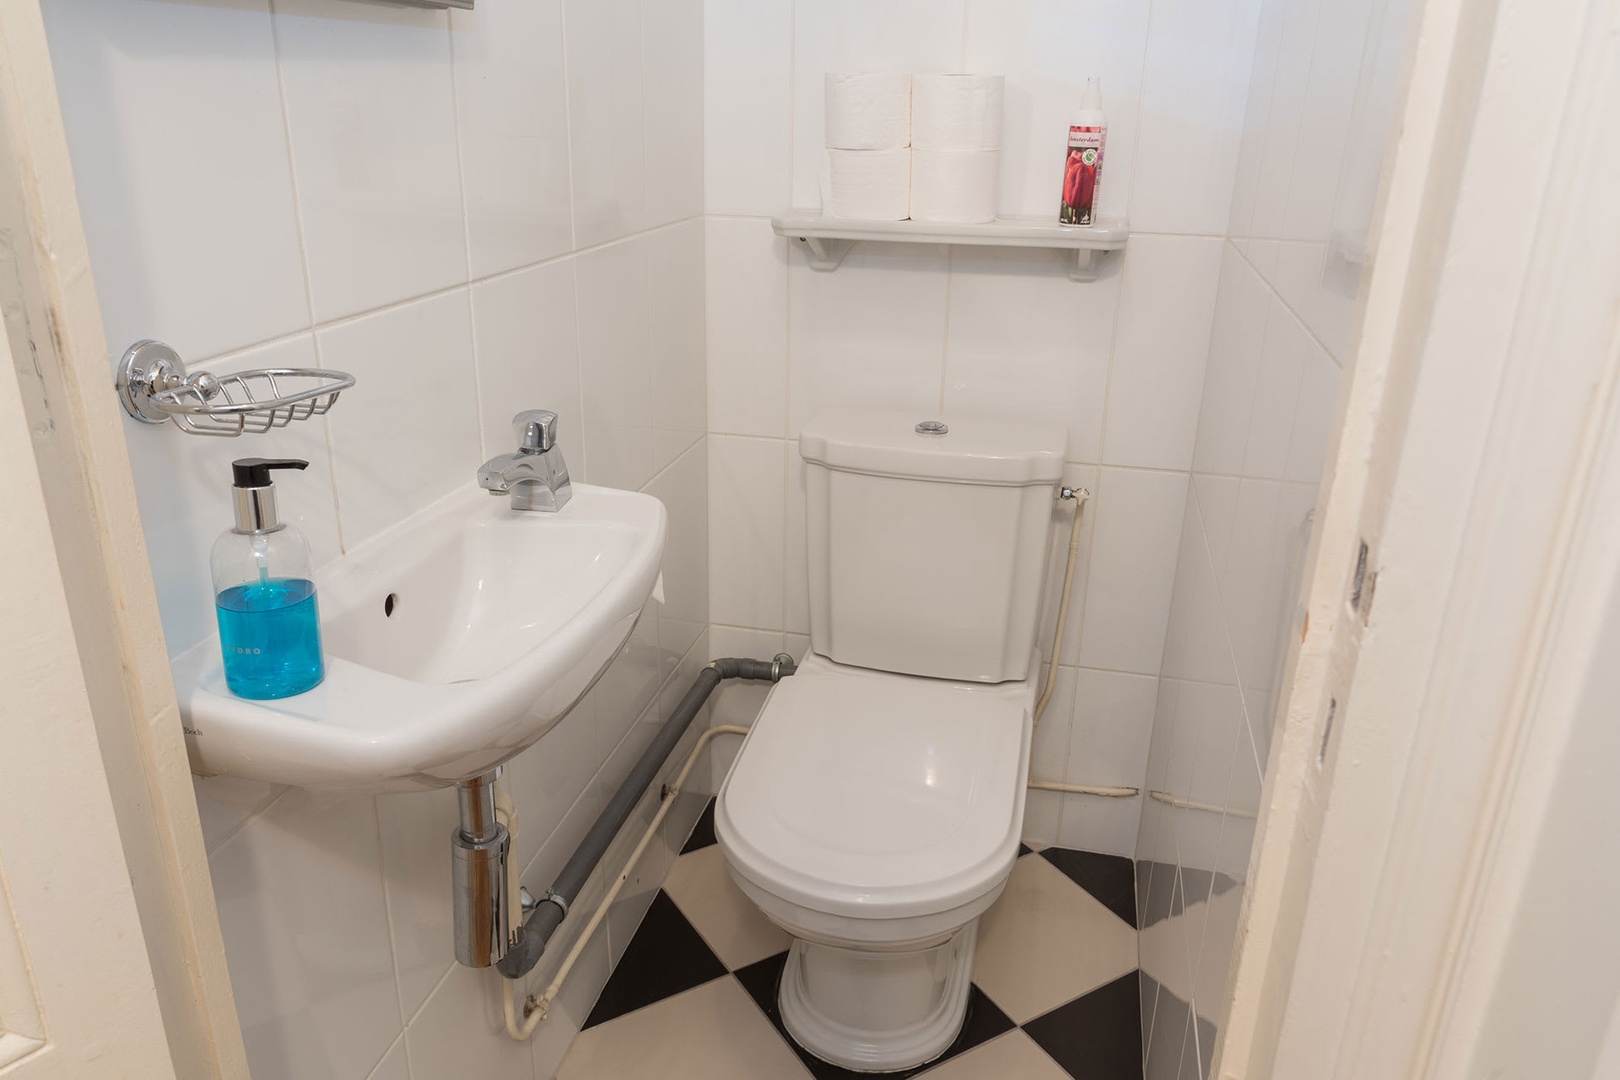 There is a separate half bath with toilet and sink next to bedroom 2.